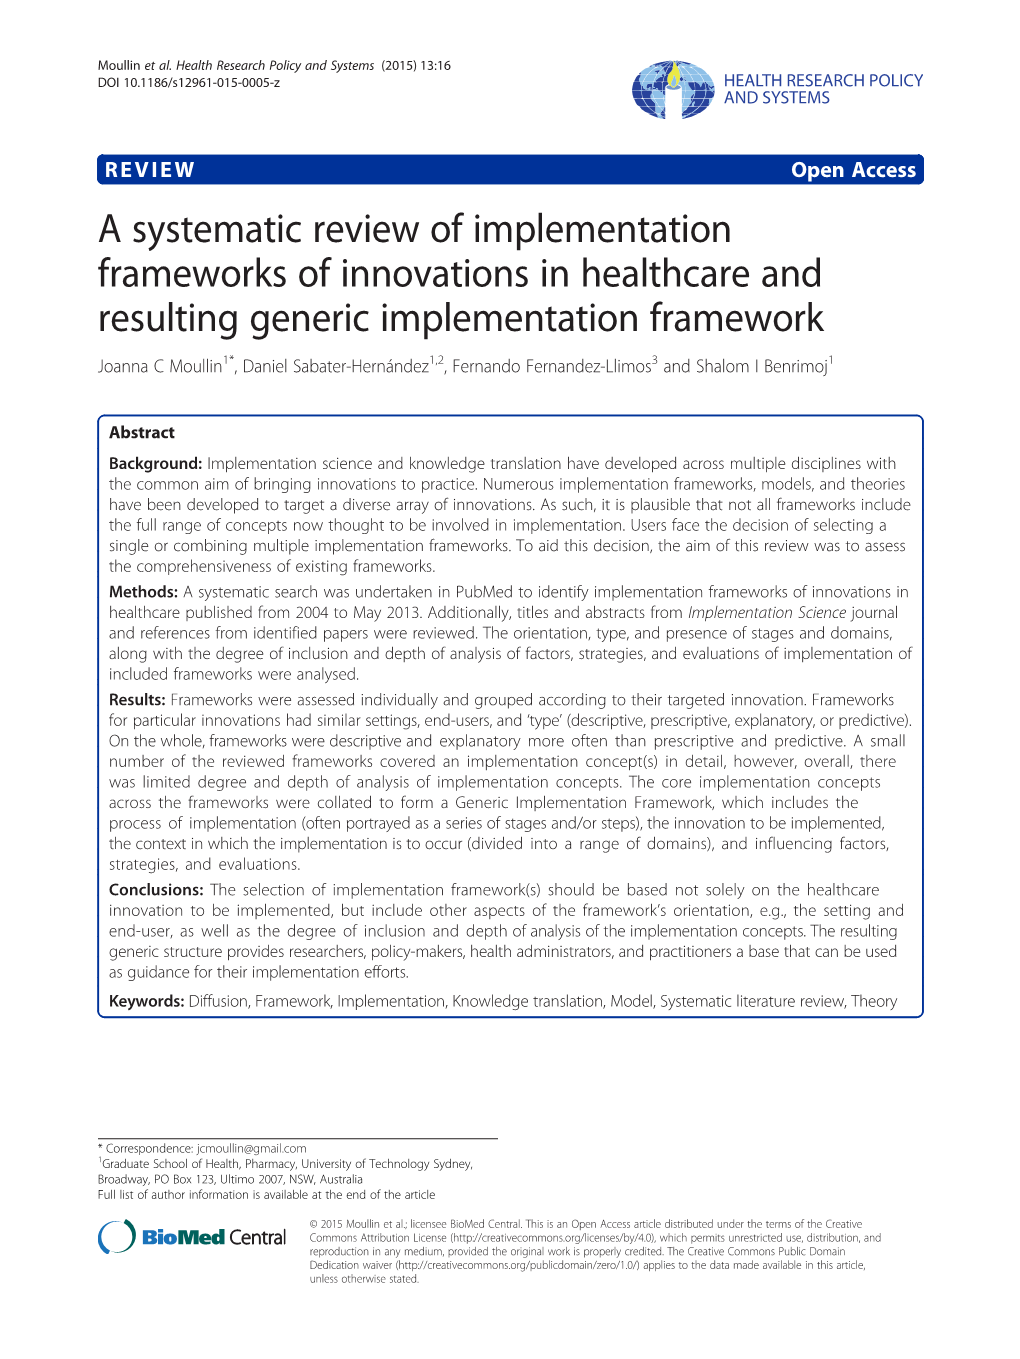 A Systematic Review of Implementation Frameworks of Innovations in Healthcare and Resulting Generic Implementation Framework